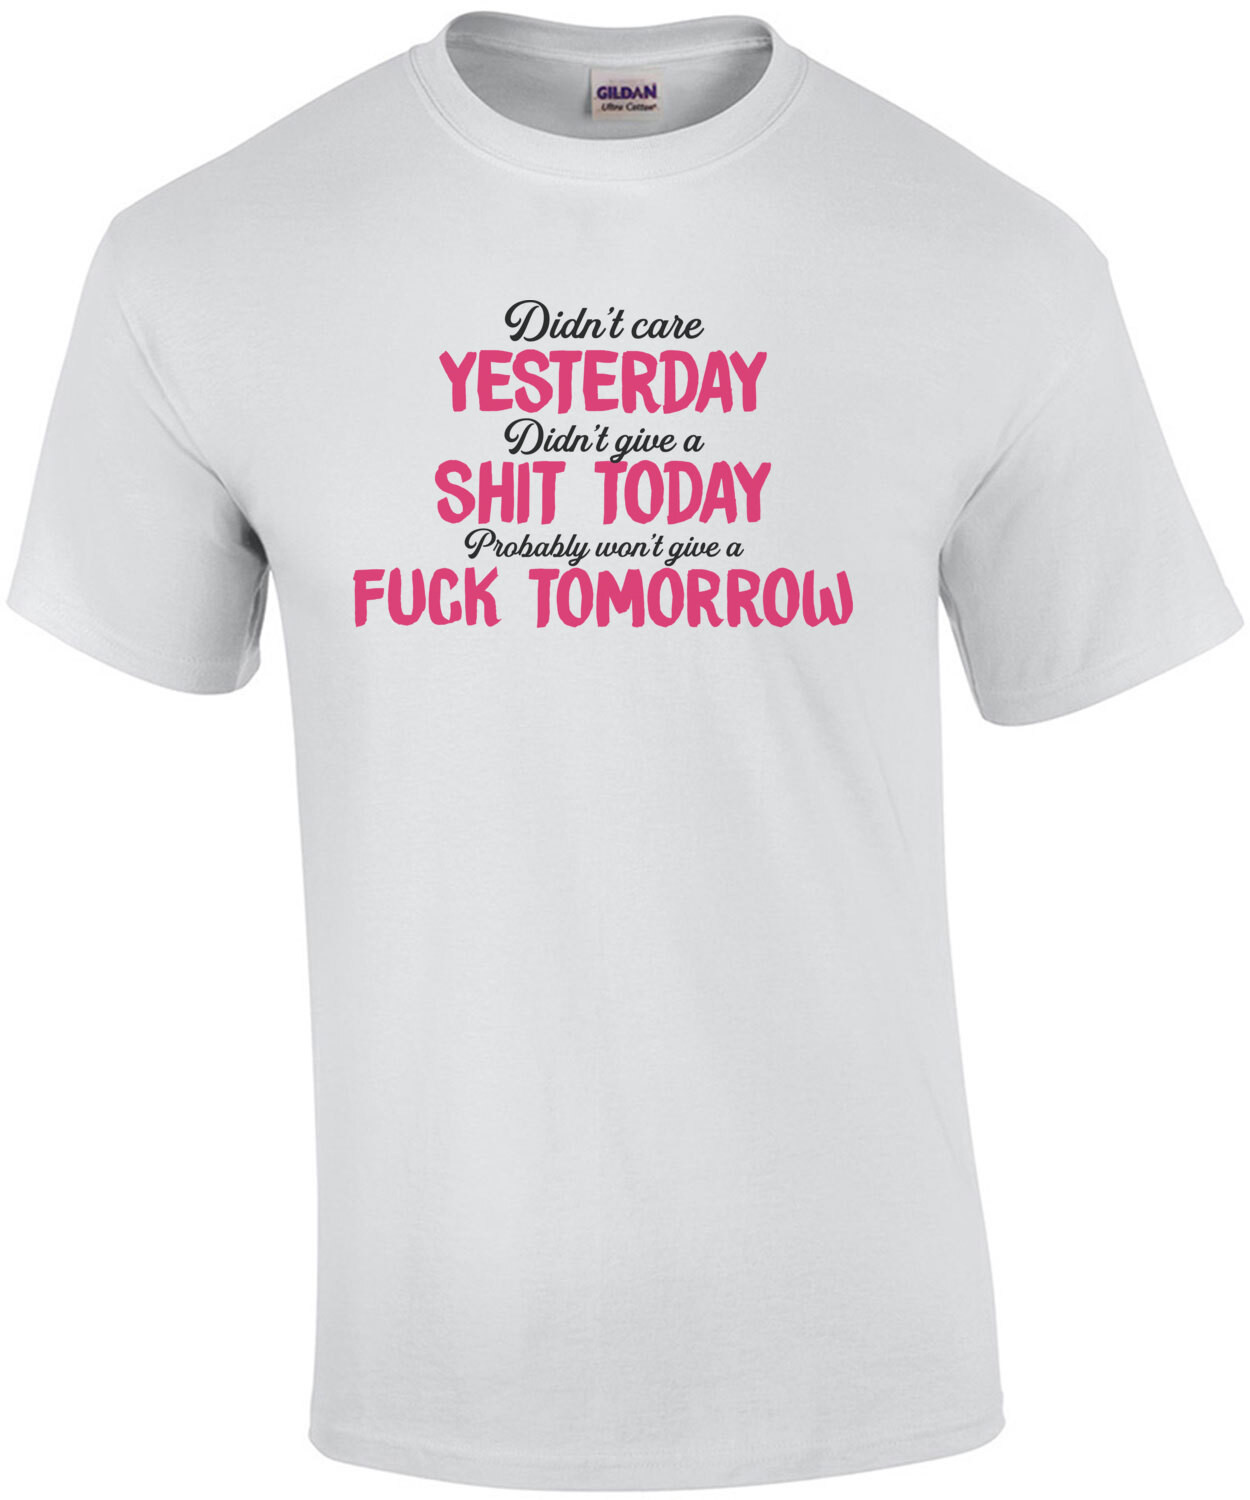 Didn't care yesterday. Didn't give a shit today. Probably won't give a fuck tomorrow. Sarcastic T-Shirt